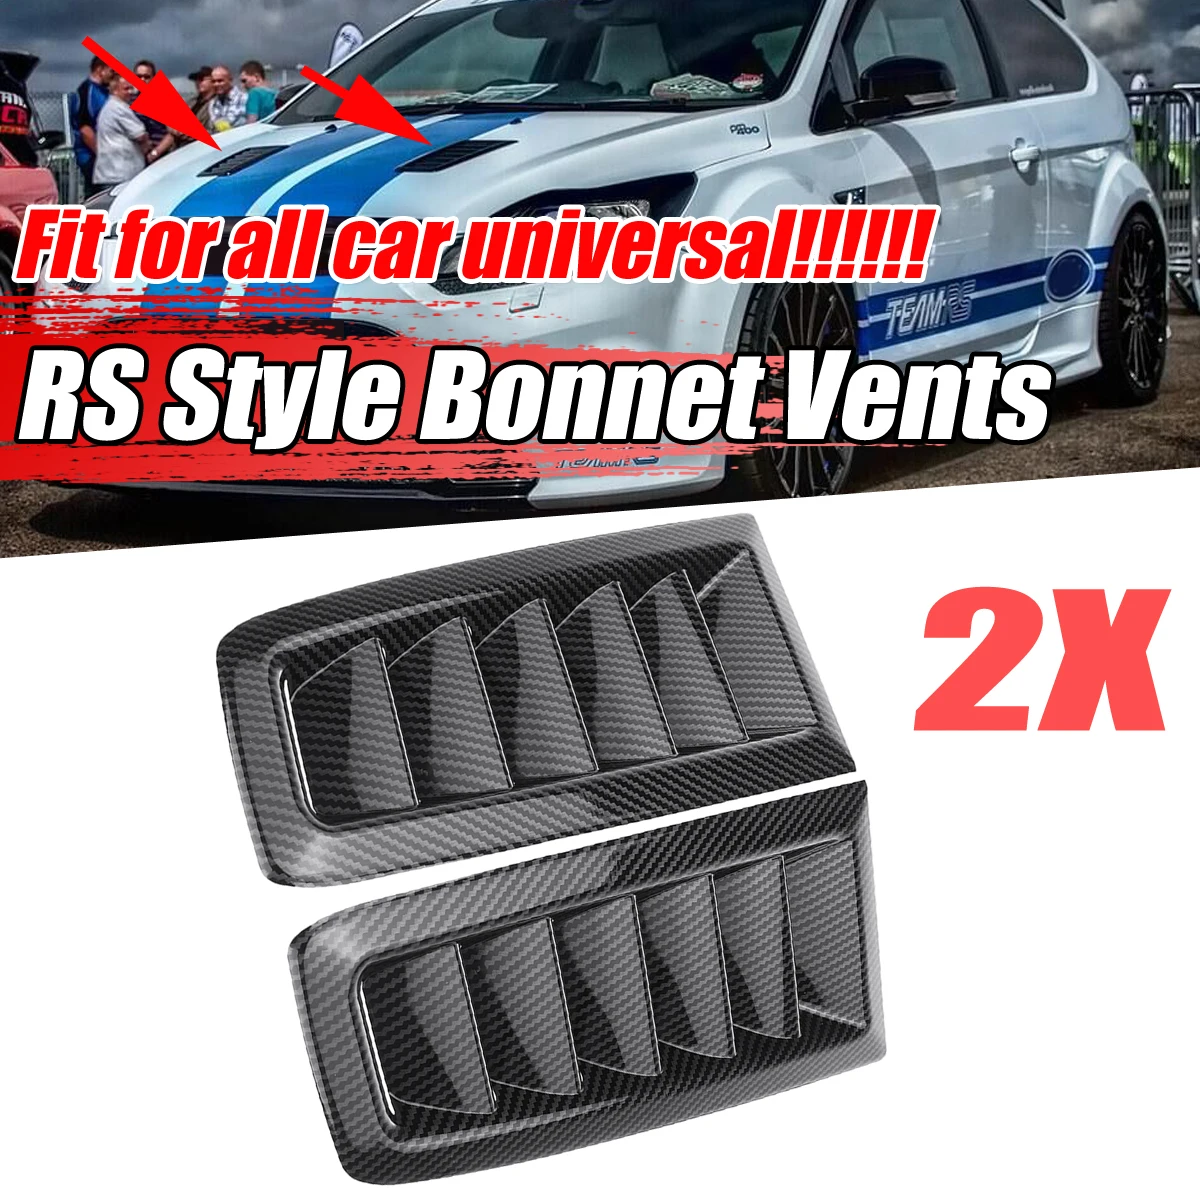 ABS Universal 2x Car Front Bonnet Vents Hood For Ford For Focus MK2 For BMW For BENZ For Audi For Civic For LEXUS For VW Golf